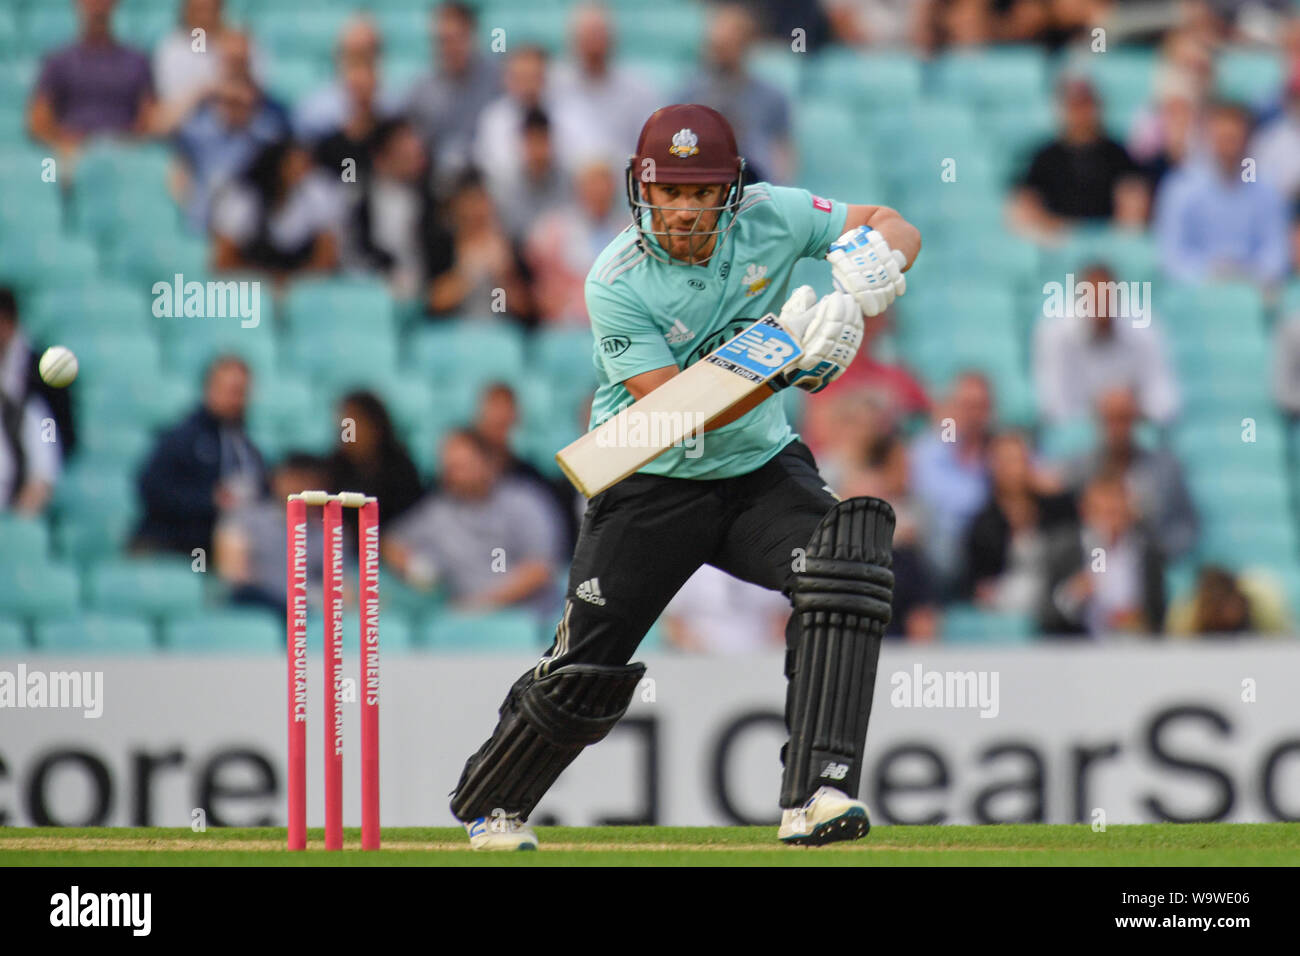 LONDON, UNITED KINGDOM. 15th Aug, 2019. Aaron. Finch of Surrey Cricket Club during T20 Vitality Blast Fixture between Surrey vs Sussex at The Kia Oval Cricket Ground on Thursday, August 15, 2019 in LONDON ENGLAND. Credit: Taka G Wu/Alamy Live News Stock Photo